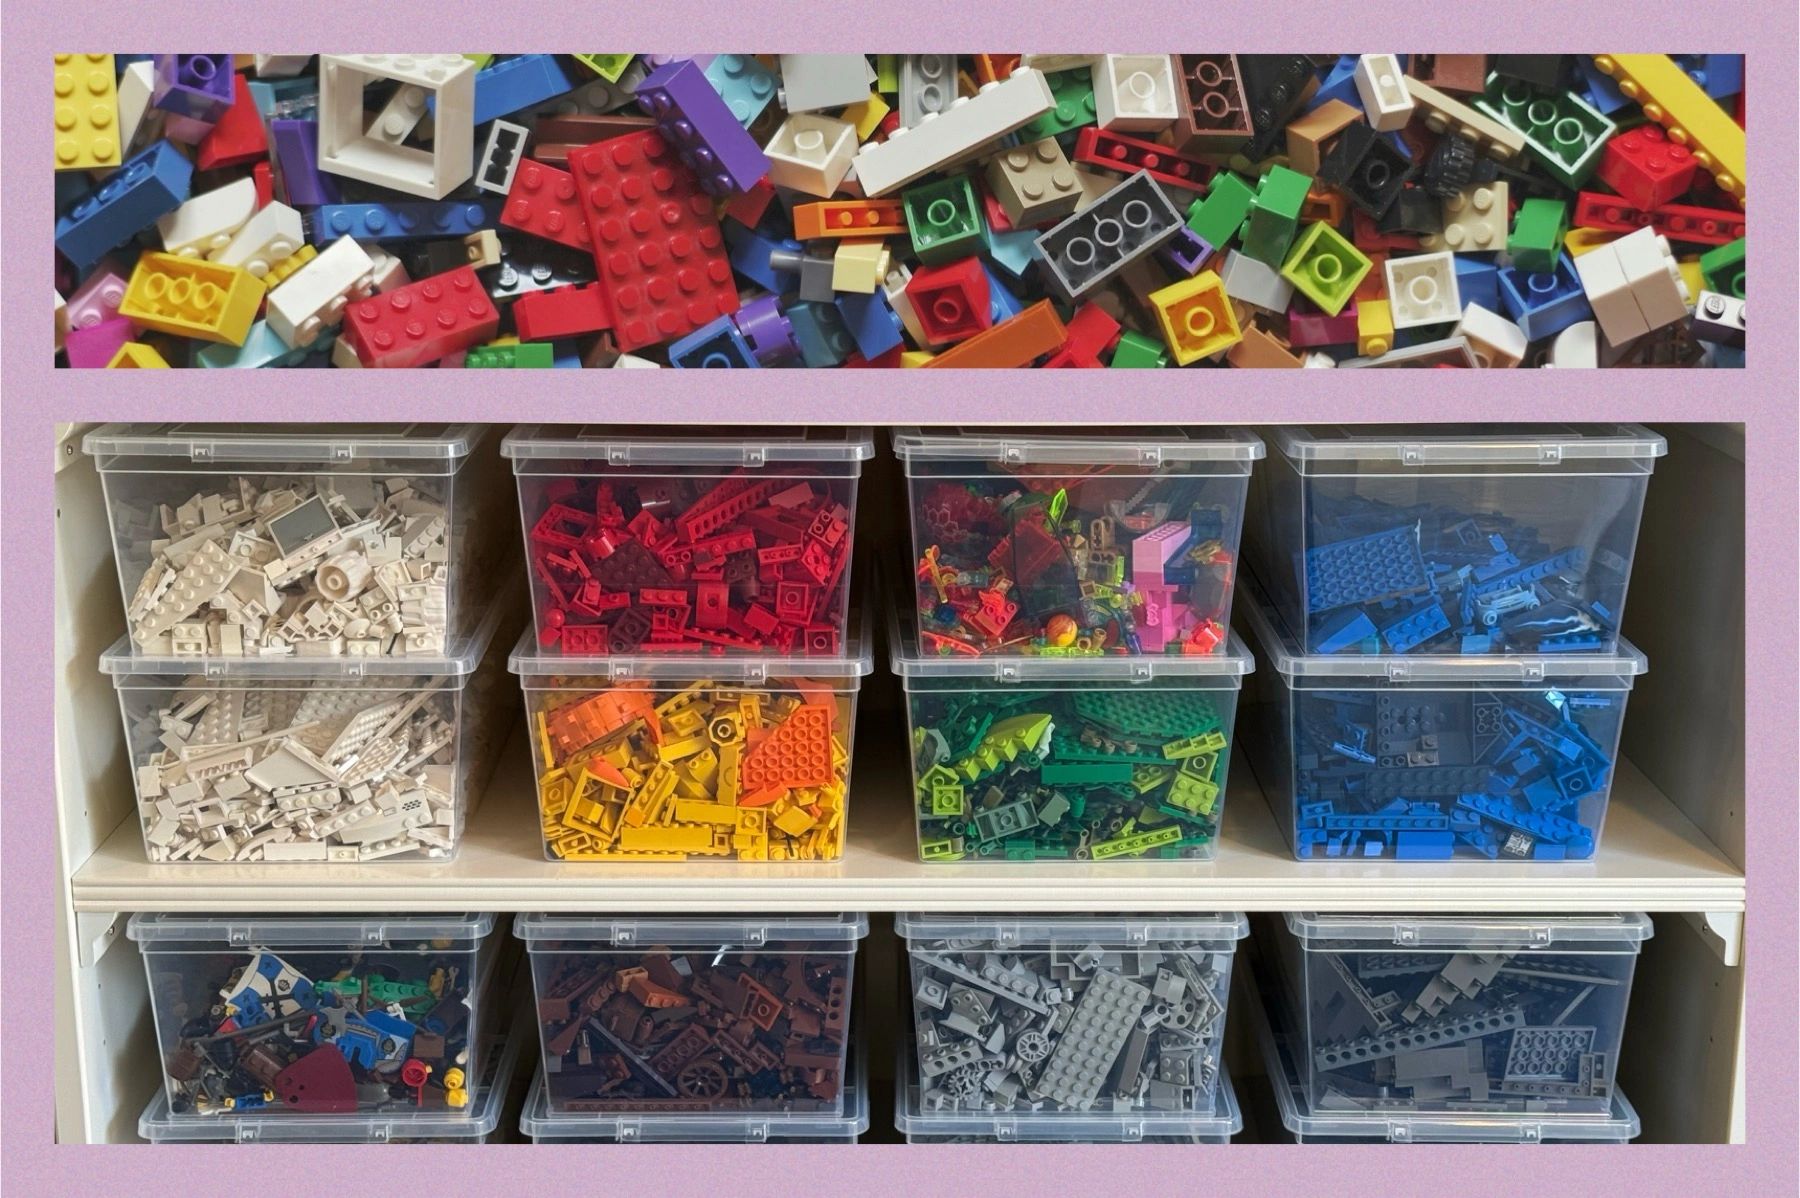 lego pieces jumbled together and then sorted by color into bins